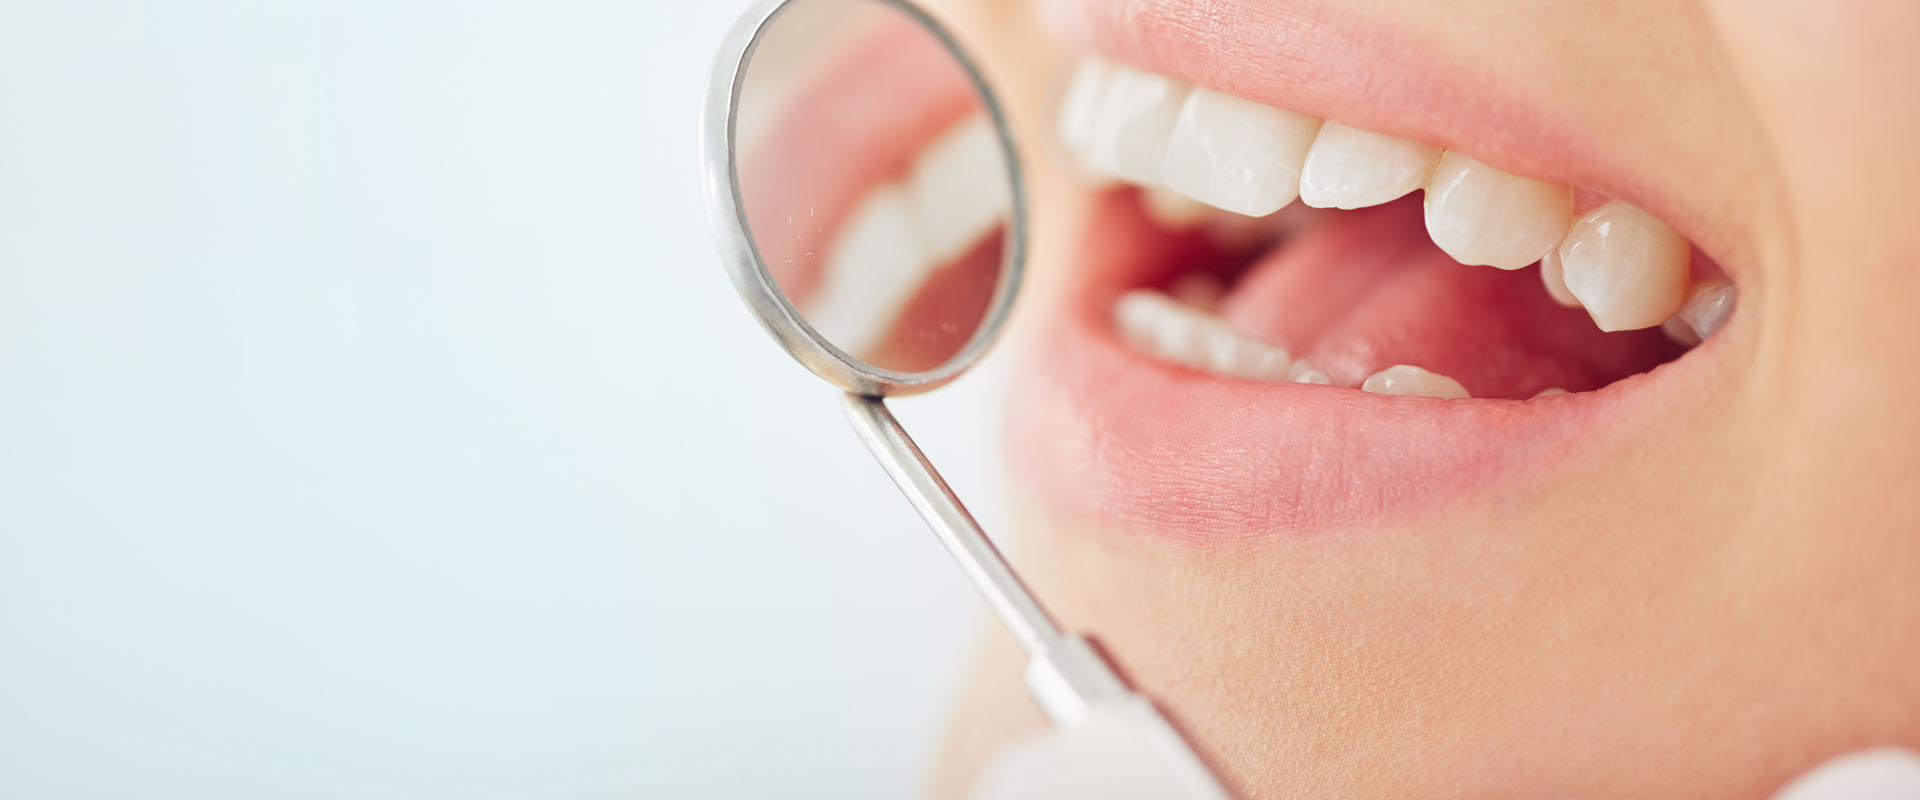 Can Fillings Look Like Your Natural Teeth? - TruCare Dentistry